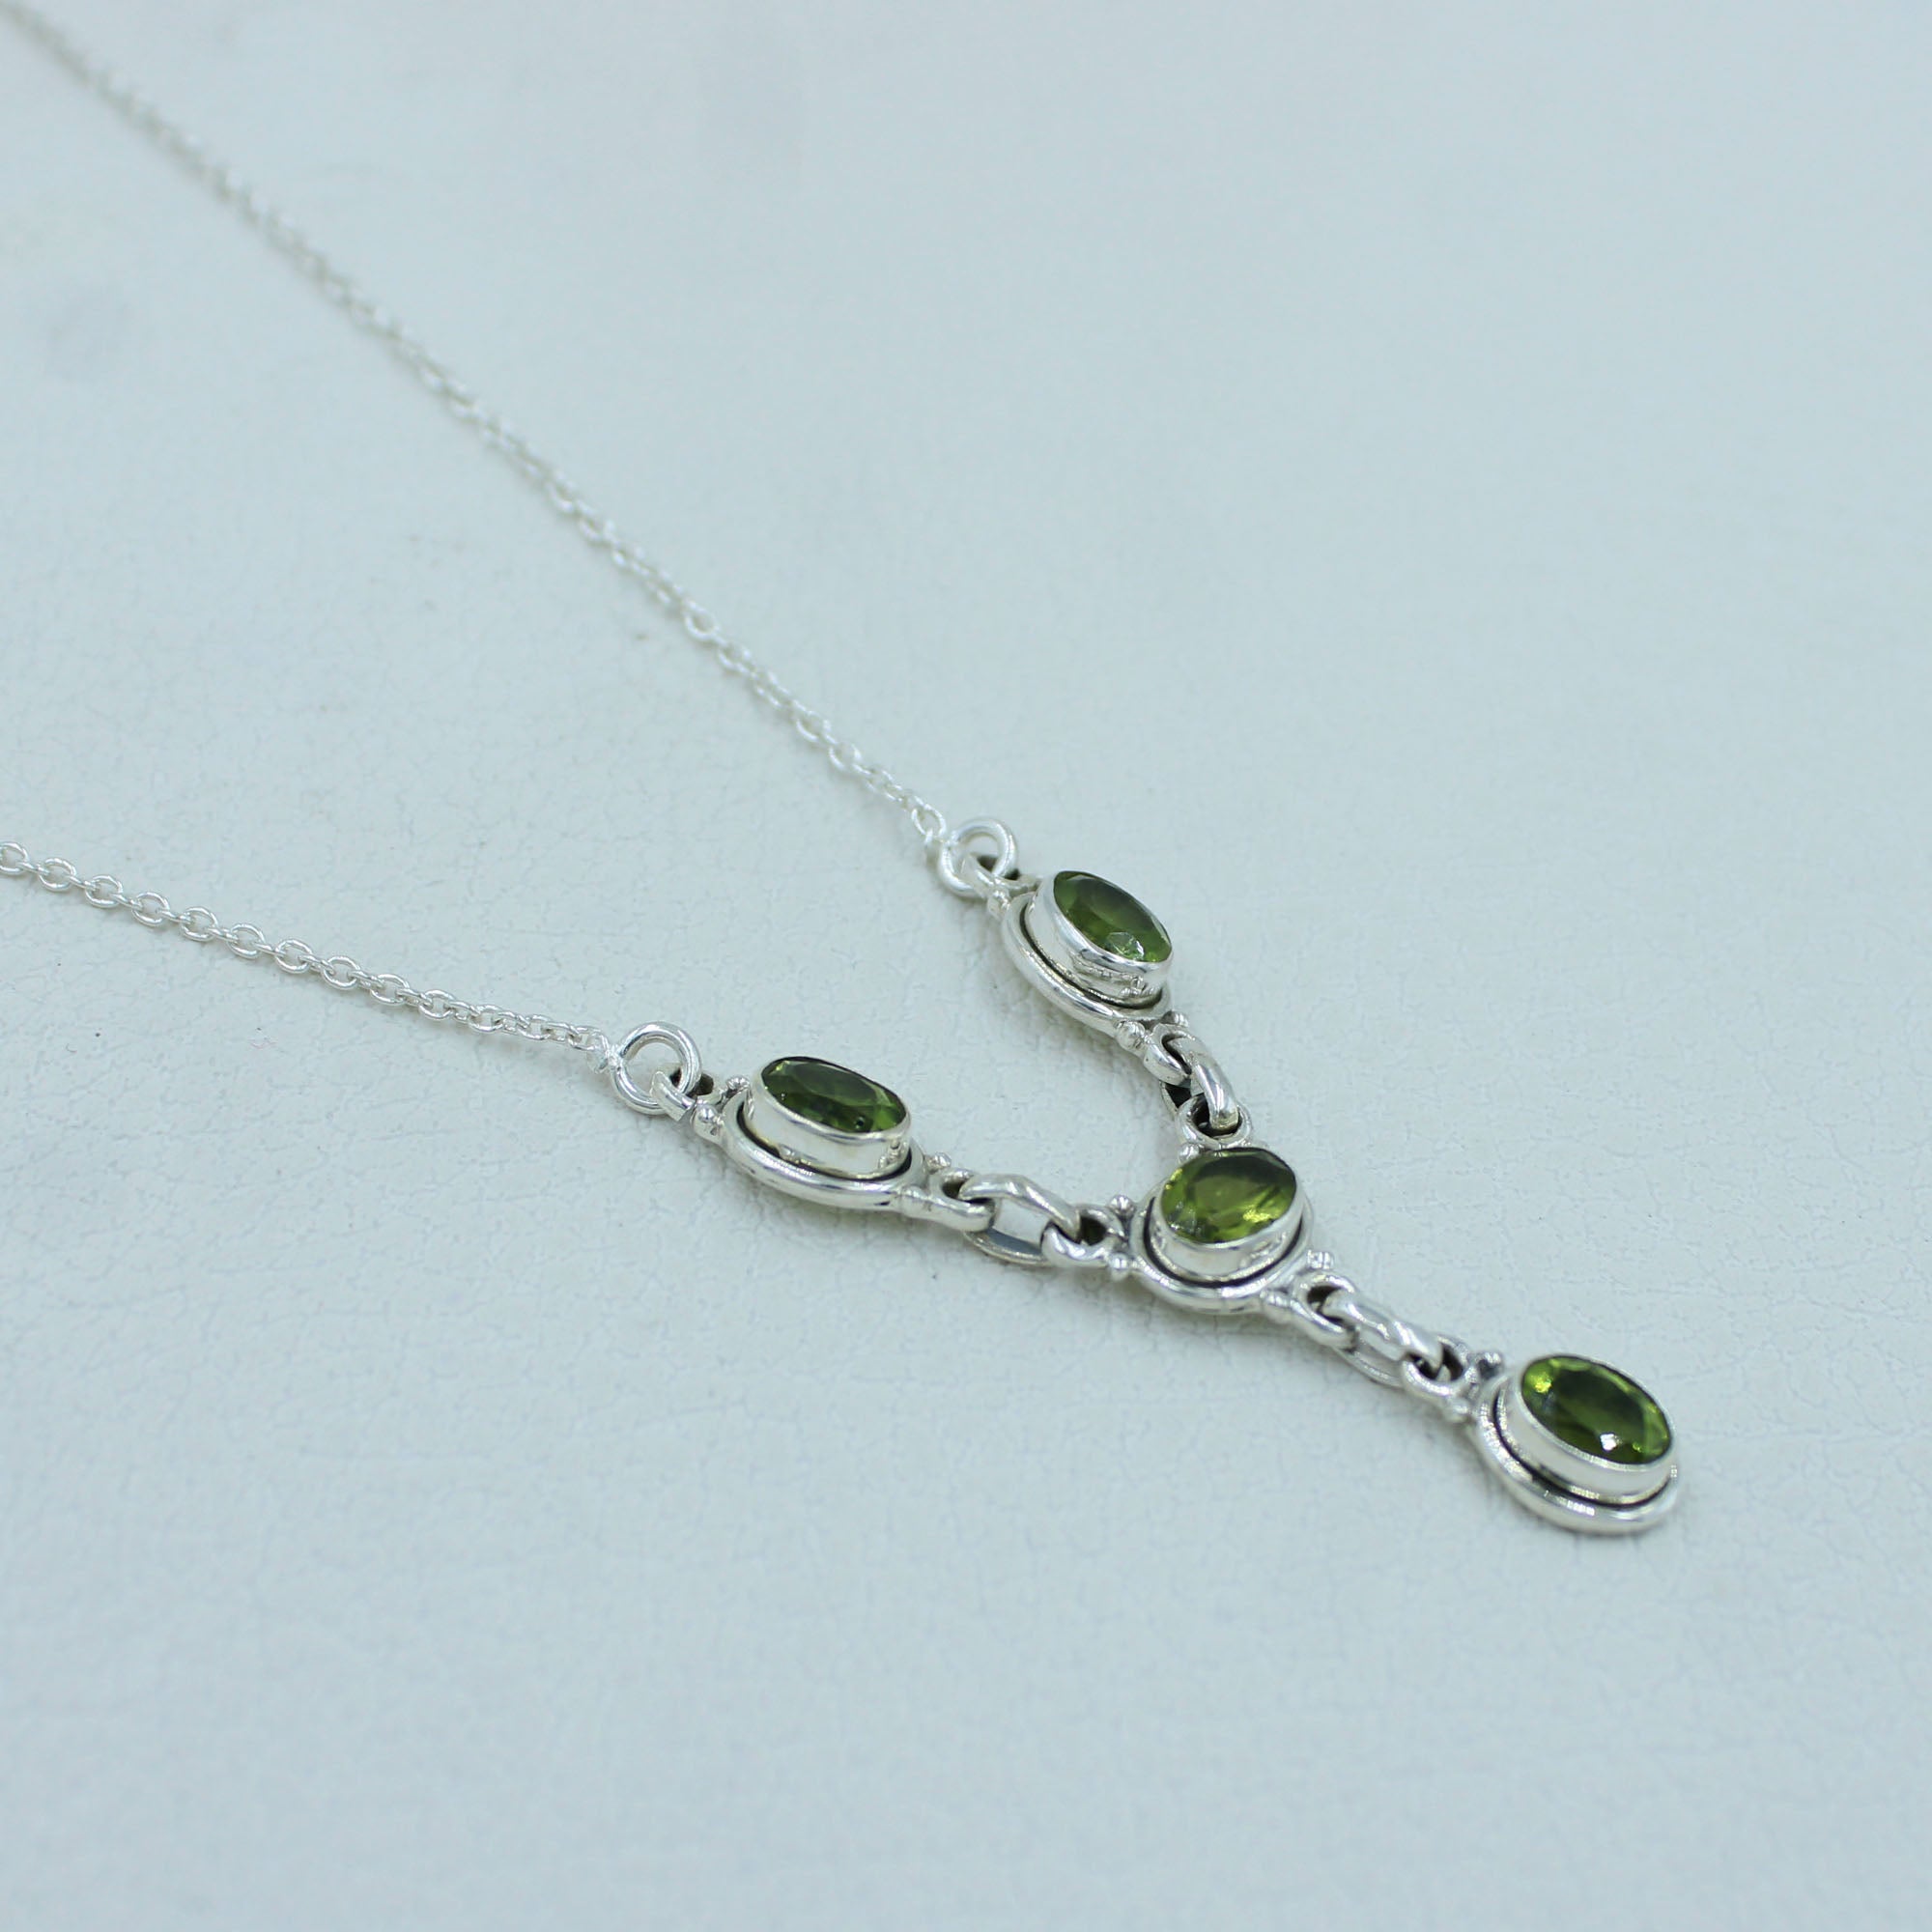 New Design Peridot Sterling Silver Necklace